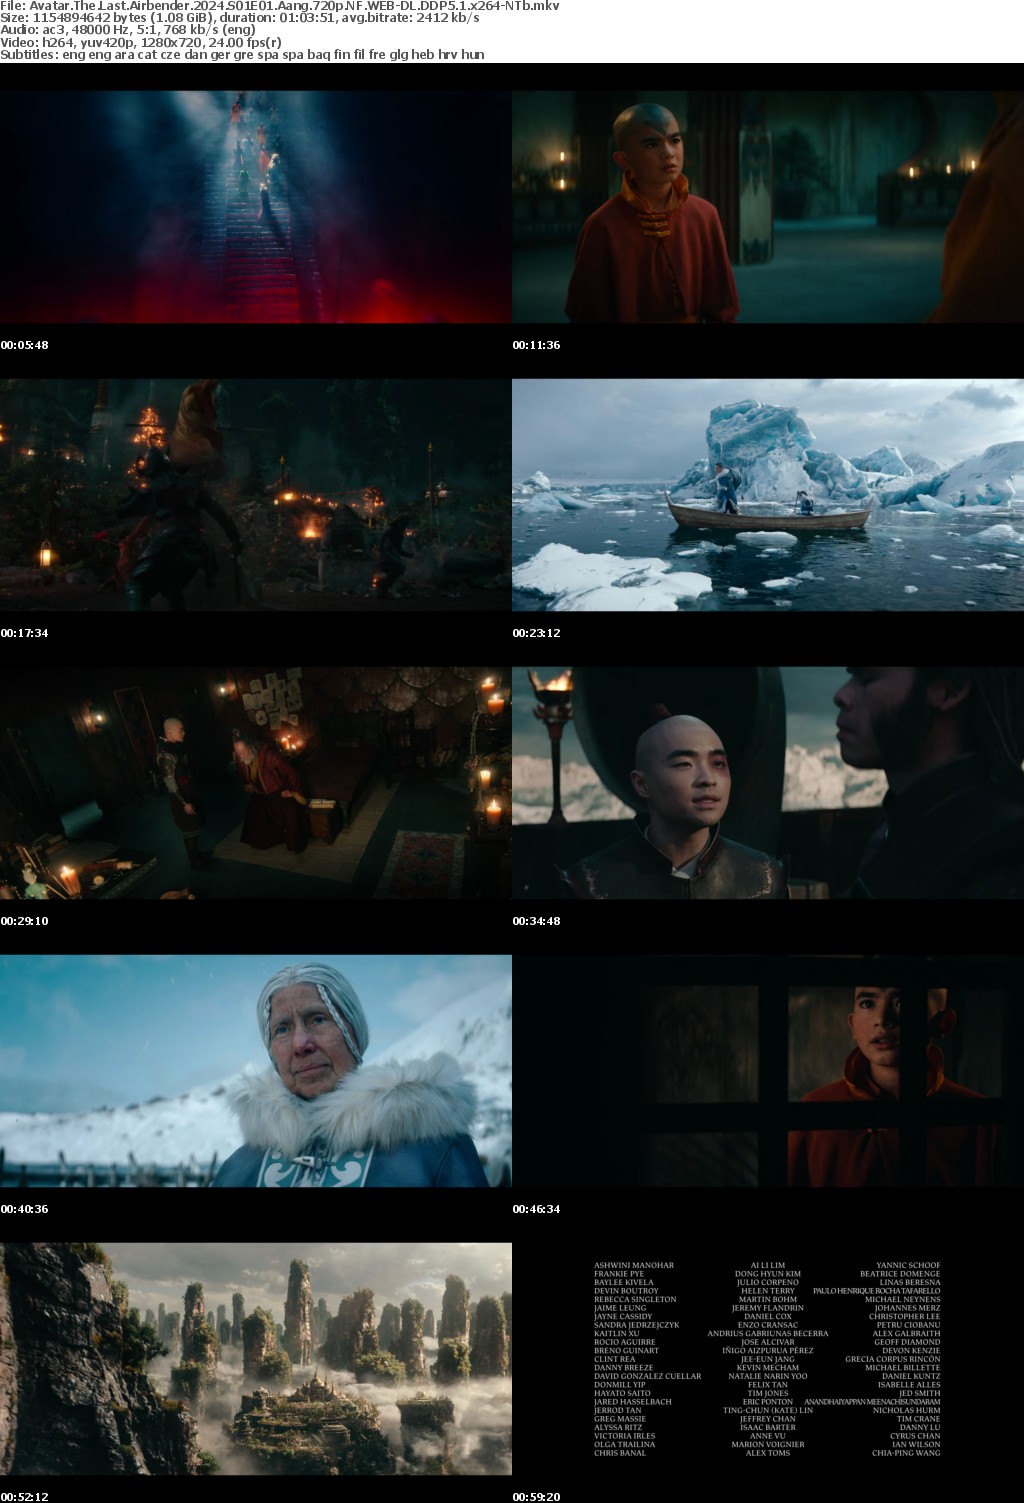 Avatar The Last Airbender 2024 S01E01 Aang 720p NF WEB-DL DDP5 1 x264-NTb